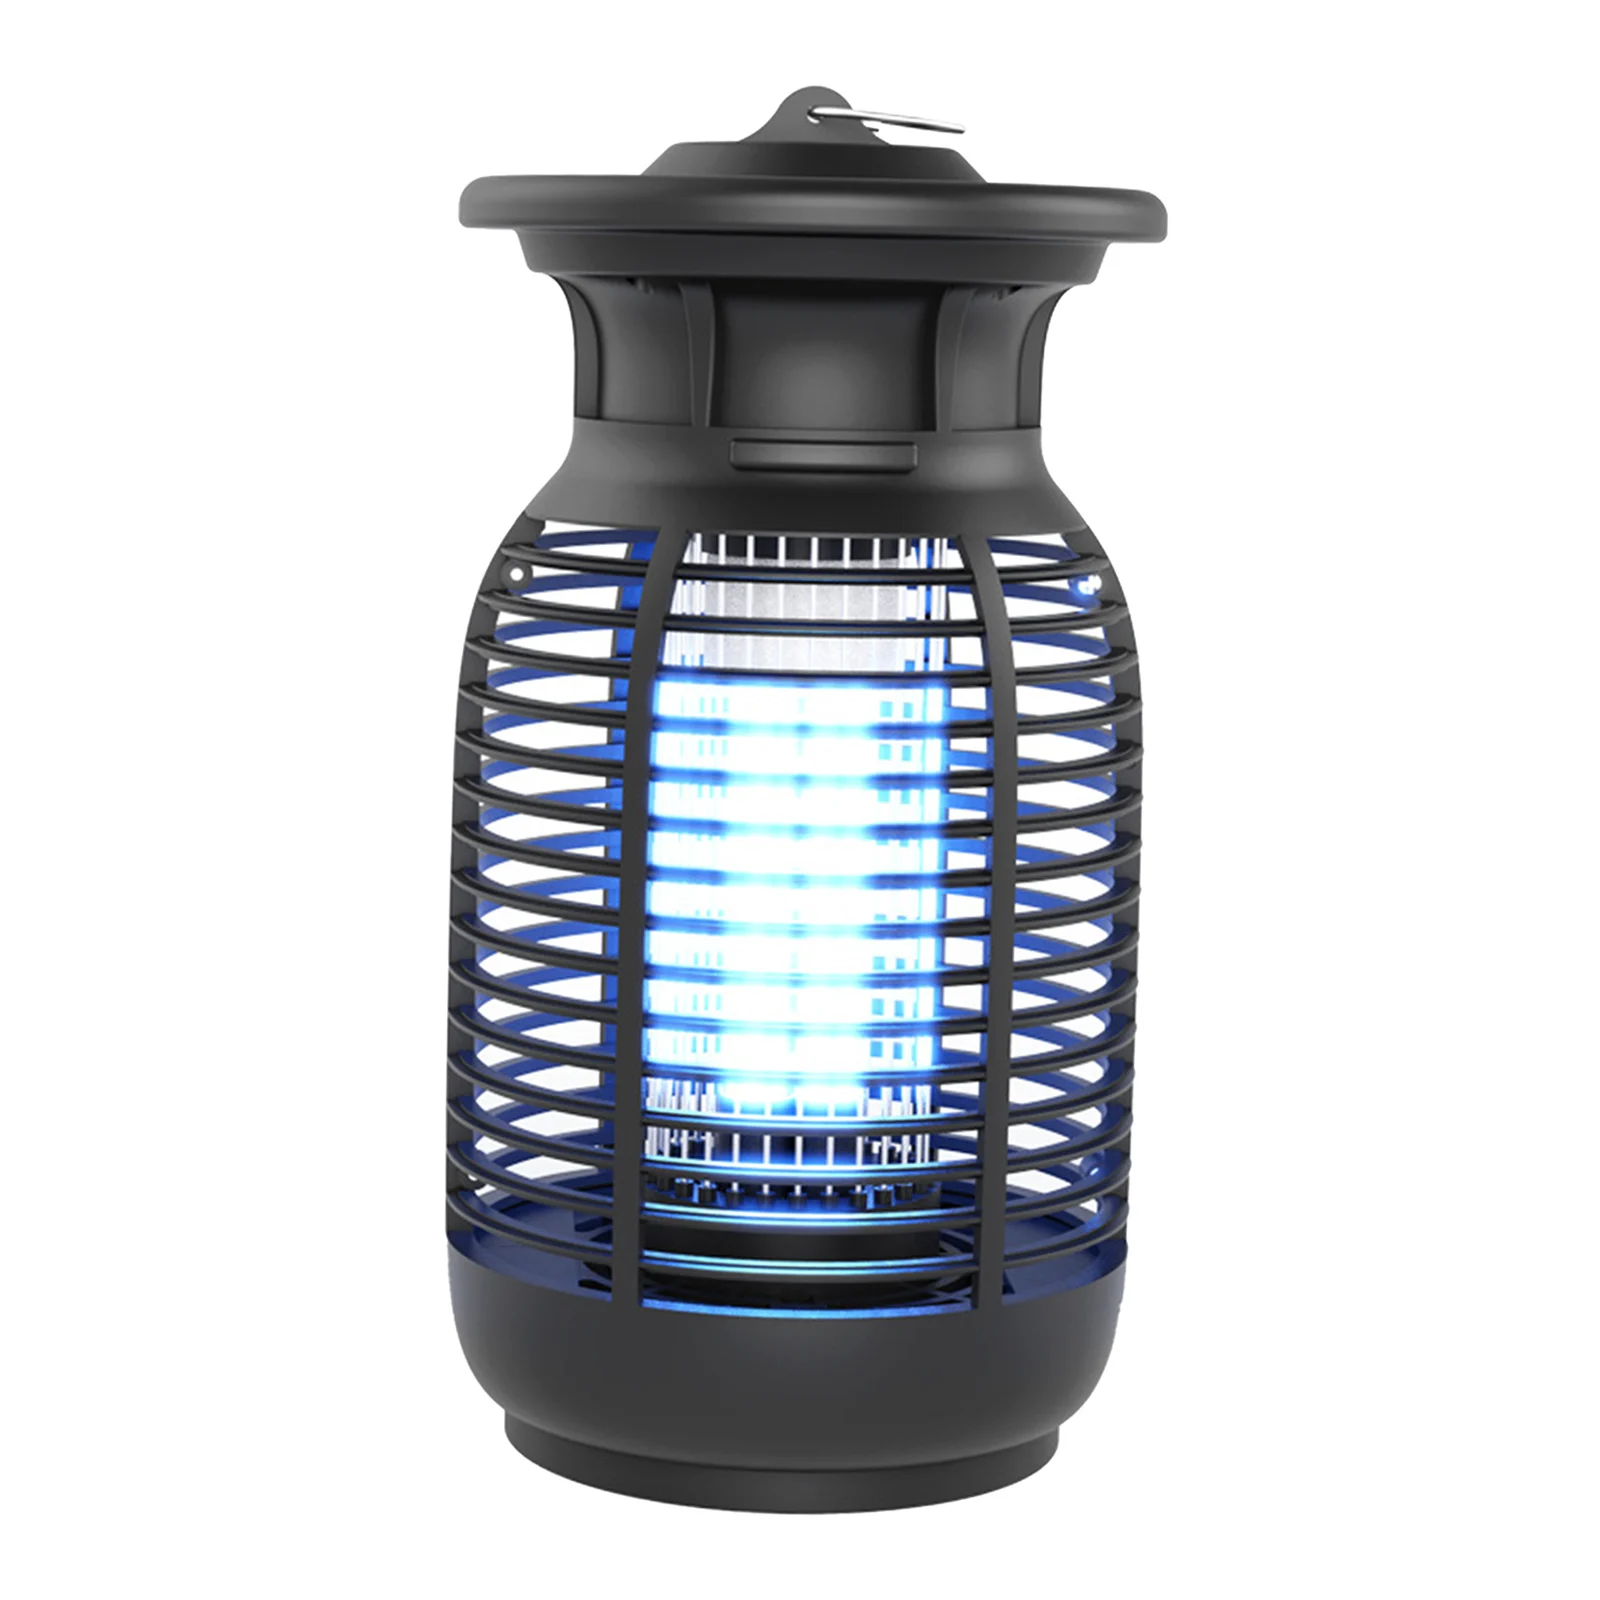 Electric Mosquito Killer Lamp 3000V High Powered Fly Bug Zapper Trap Mosquito Repellent for Home Office Garden Backyard Porch